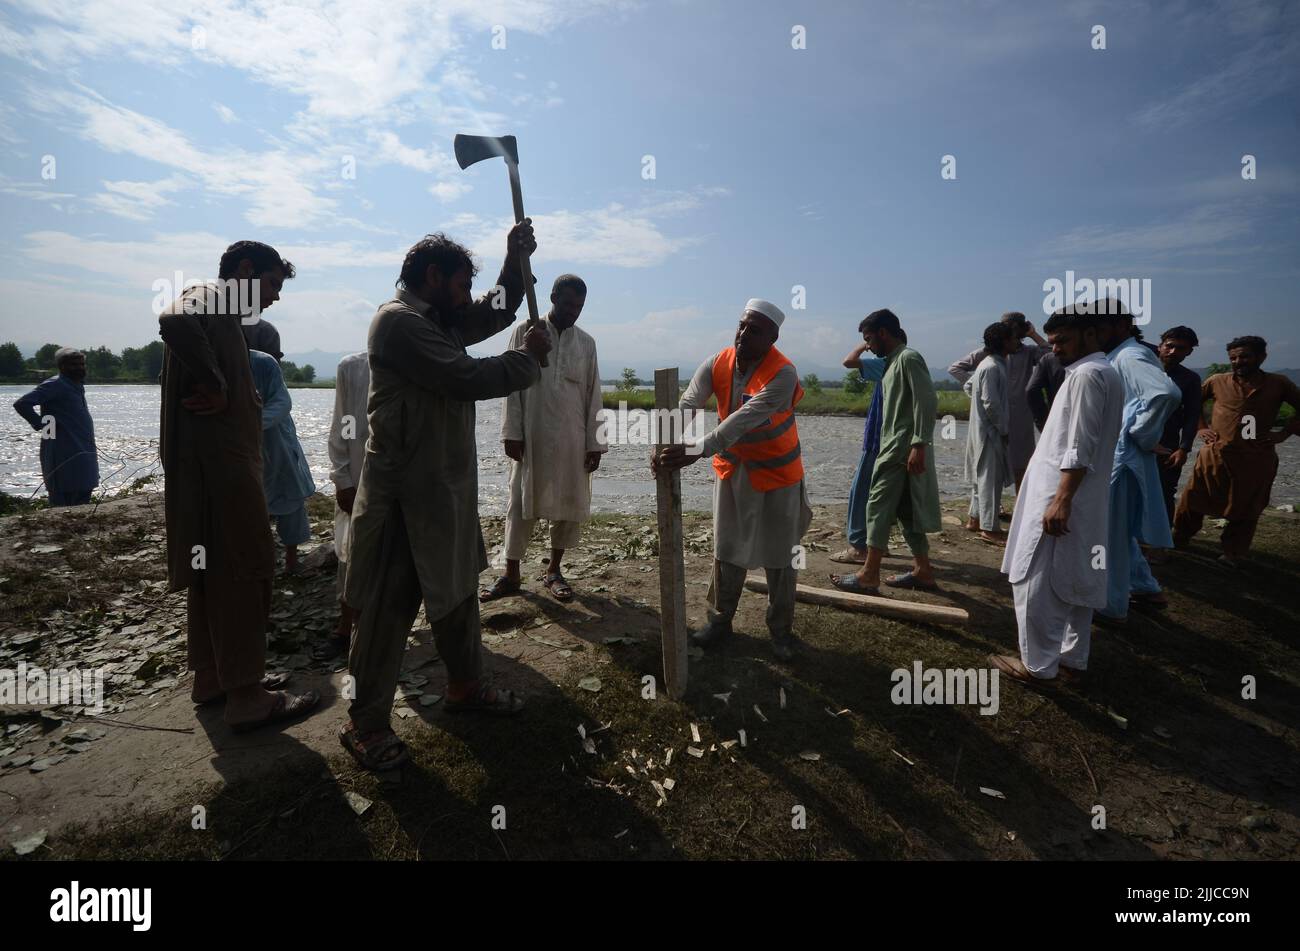 Peshawar, Khyber Pakhtunkhwa, Pakistan: July 24, 2022,  Flood in Mathura Shagai Hindkian Wazir Qila area of Peshawar since seven o'clock in the morning. Safety dams were to be built at several places under the Act, but due to the continuous increase in floods, the safety dams at three places have also been washed away. The administration has already opened the spills of Varsik Dam, while on the other hand, in Afghanistan and tribal areas. Due to continuous rain since last year, the water has diverted to the mentioned areas for which emergency measures are required. (Credit Image: © Hussain Al Stock Photo